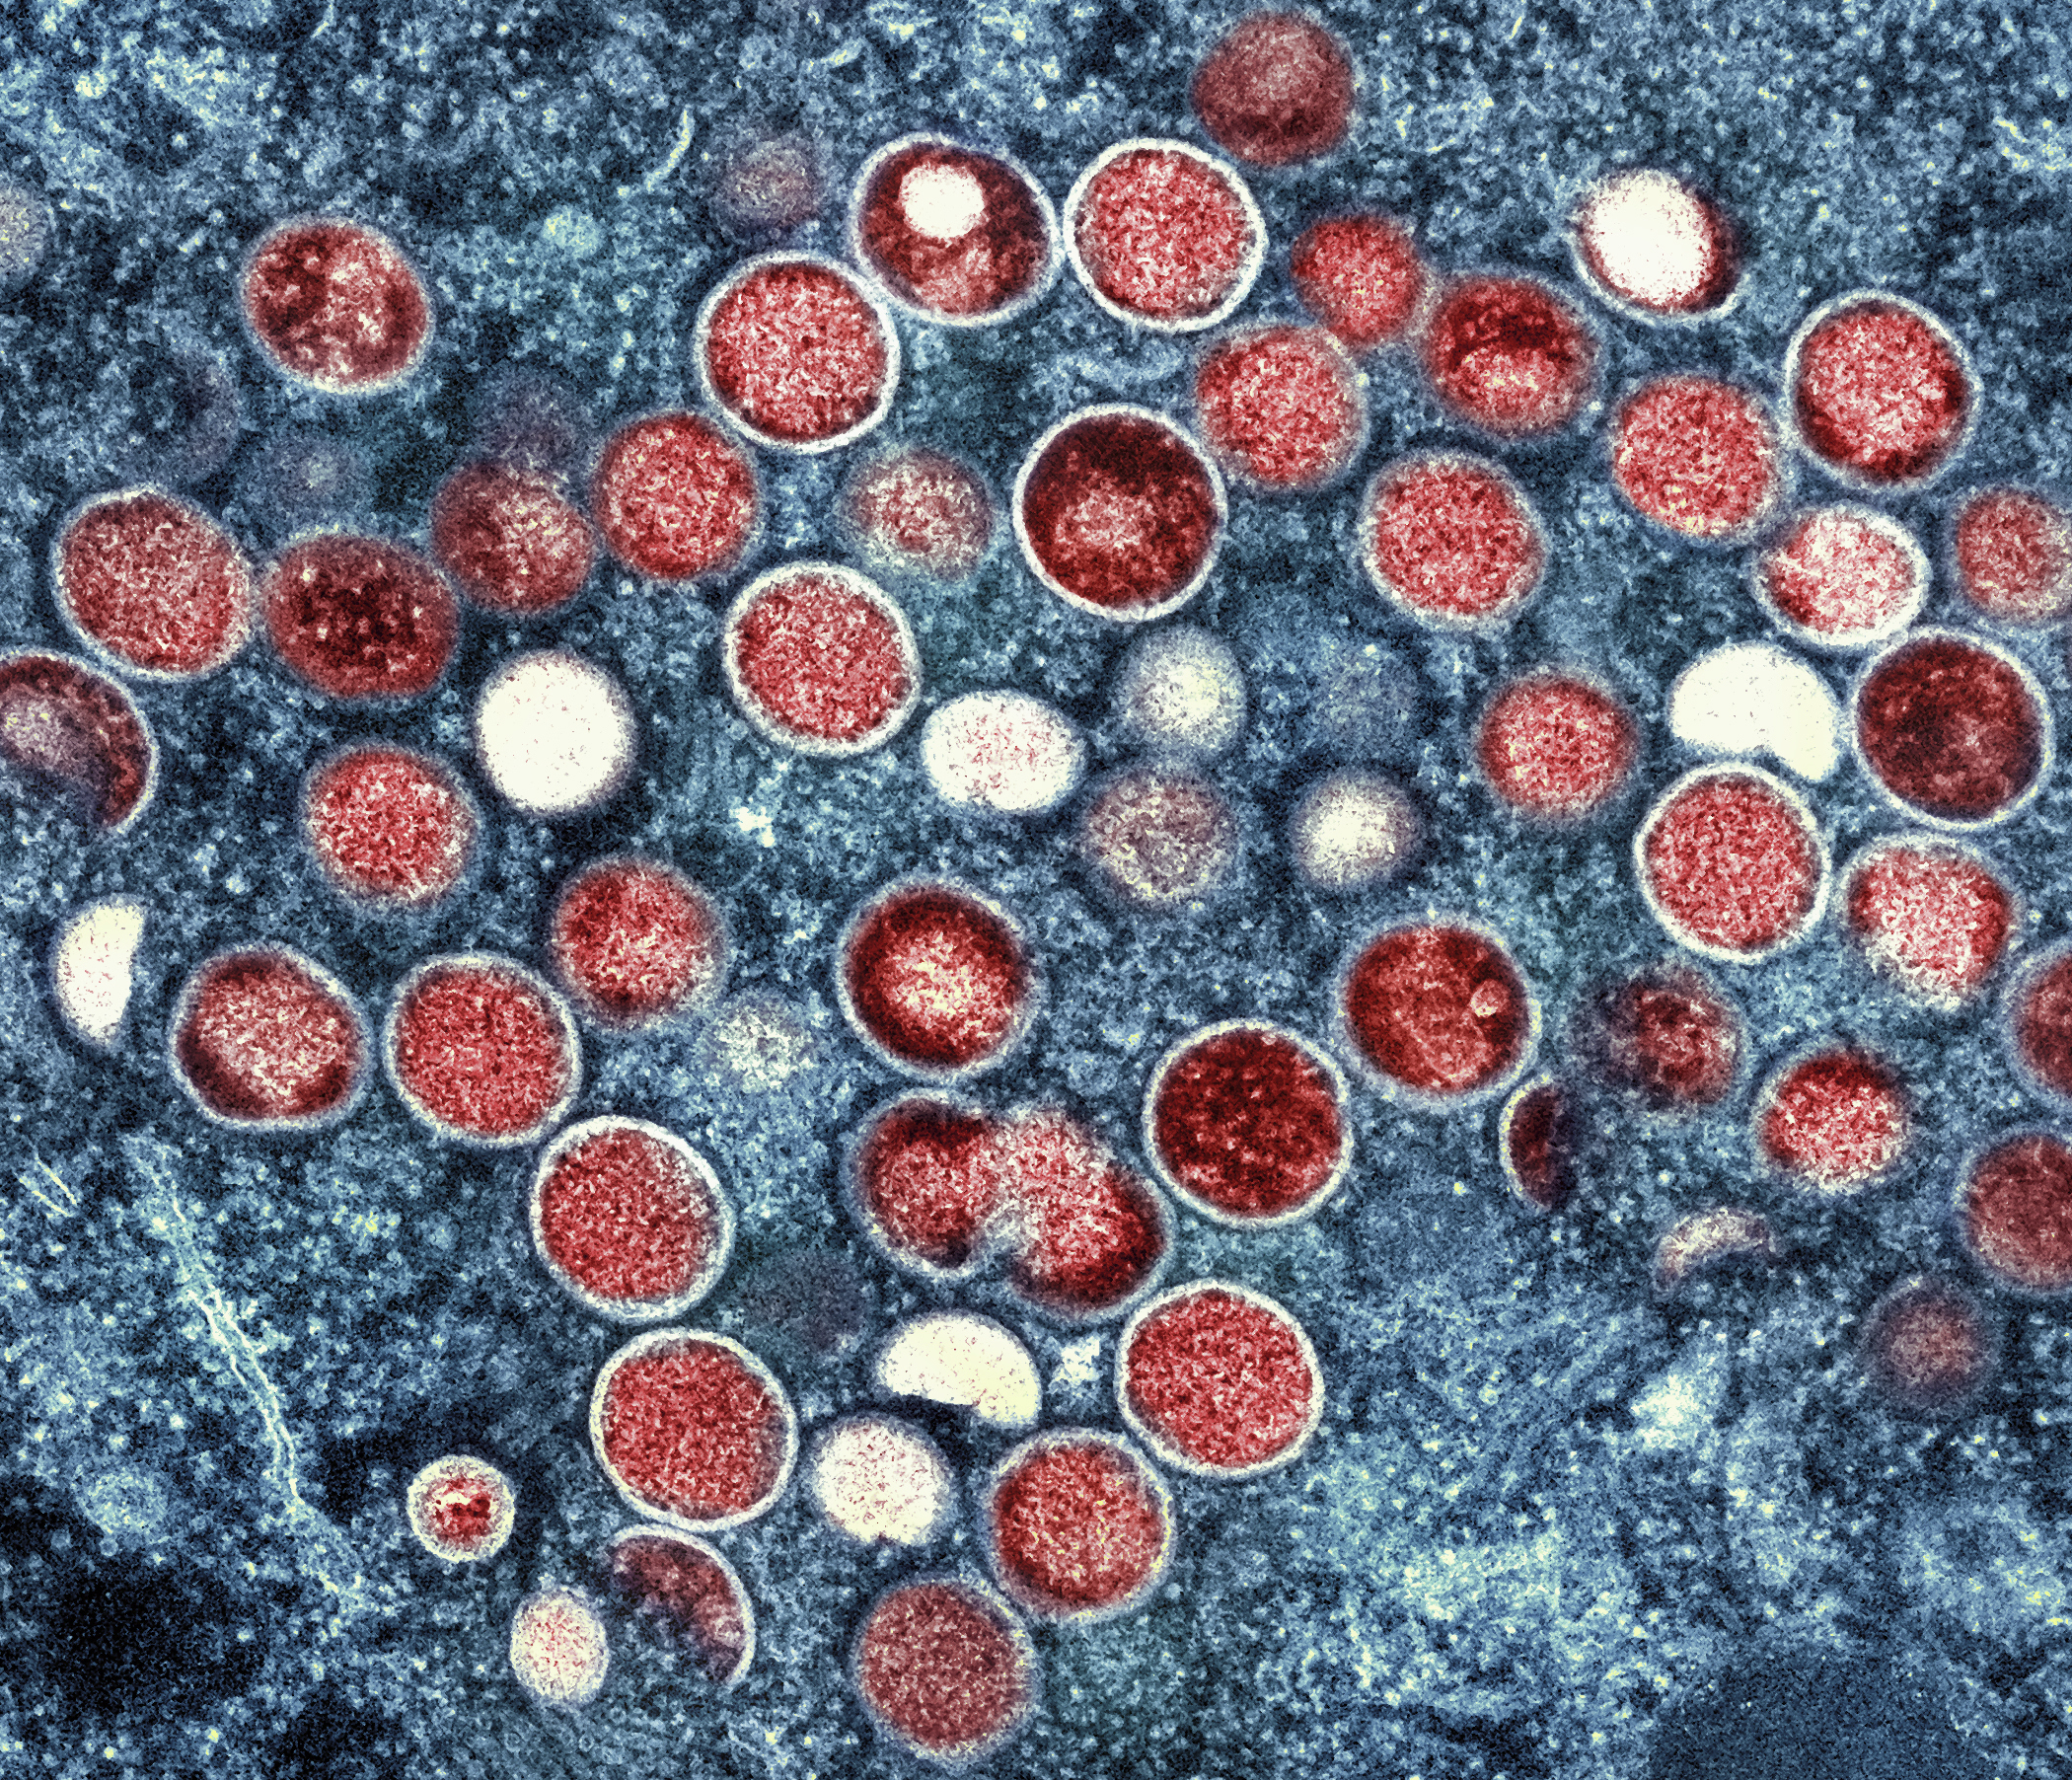 FILE - This image provided by the National Institute of Allergy and Infectious Diseases (NIAID) shows a colorized transmission electron micrograph of monkeypox particles (red) found within an infected cell (blue), cultured in the laboratory that was captured and color-enhanced at the NIAID Integrated Research Facility (IRF) in Fort Detrick, Md. On Friday, Aug. 12, 2022, The Associated Press reported on stories circulating online incorrectly claiming that monkeypox hasn't been detected in Georgia drinking water. The July 26 Atlanta-area news broadcast broadcast is being mischaracterized online to push the false claim that monkeypox has been found in residents’ tap water. (NIAID via AP)